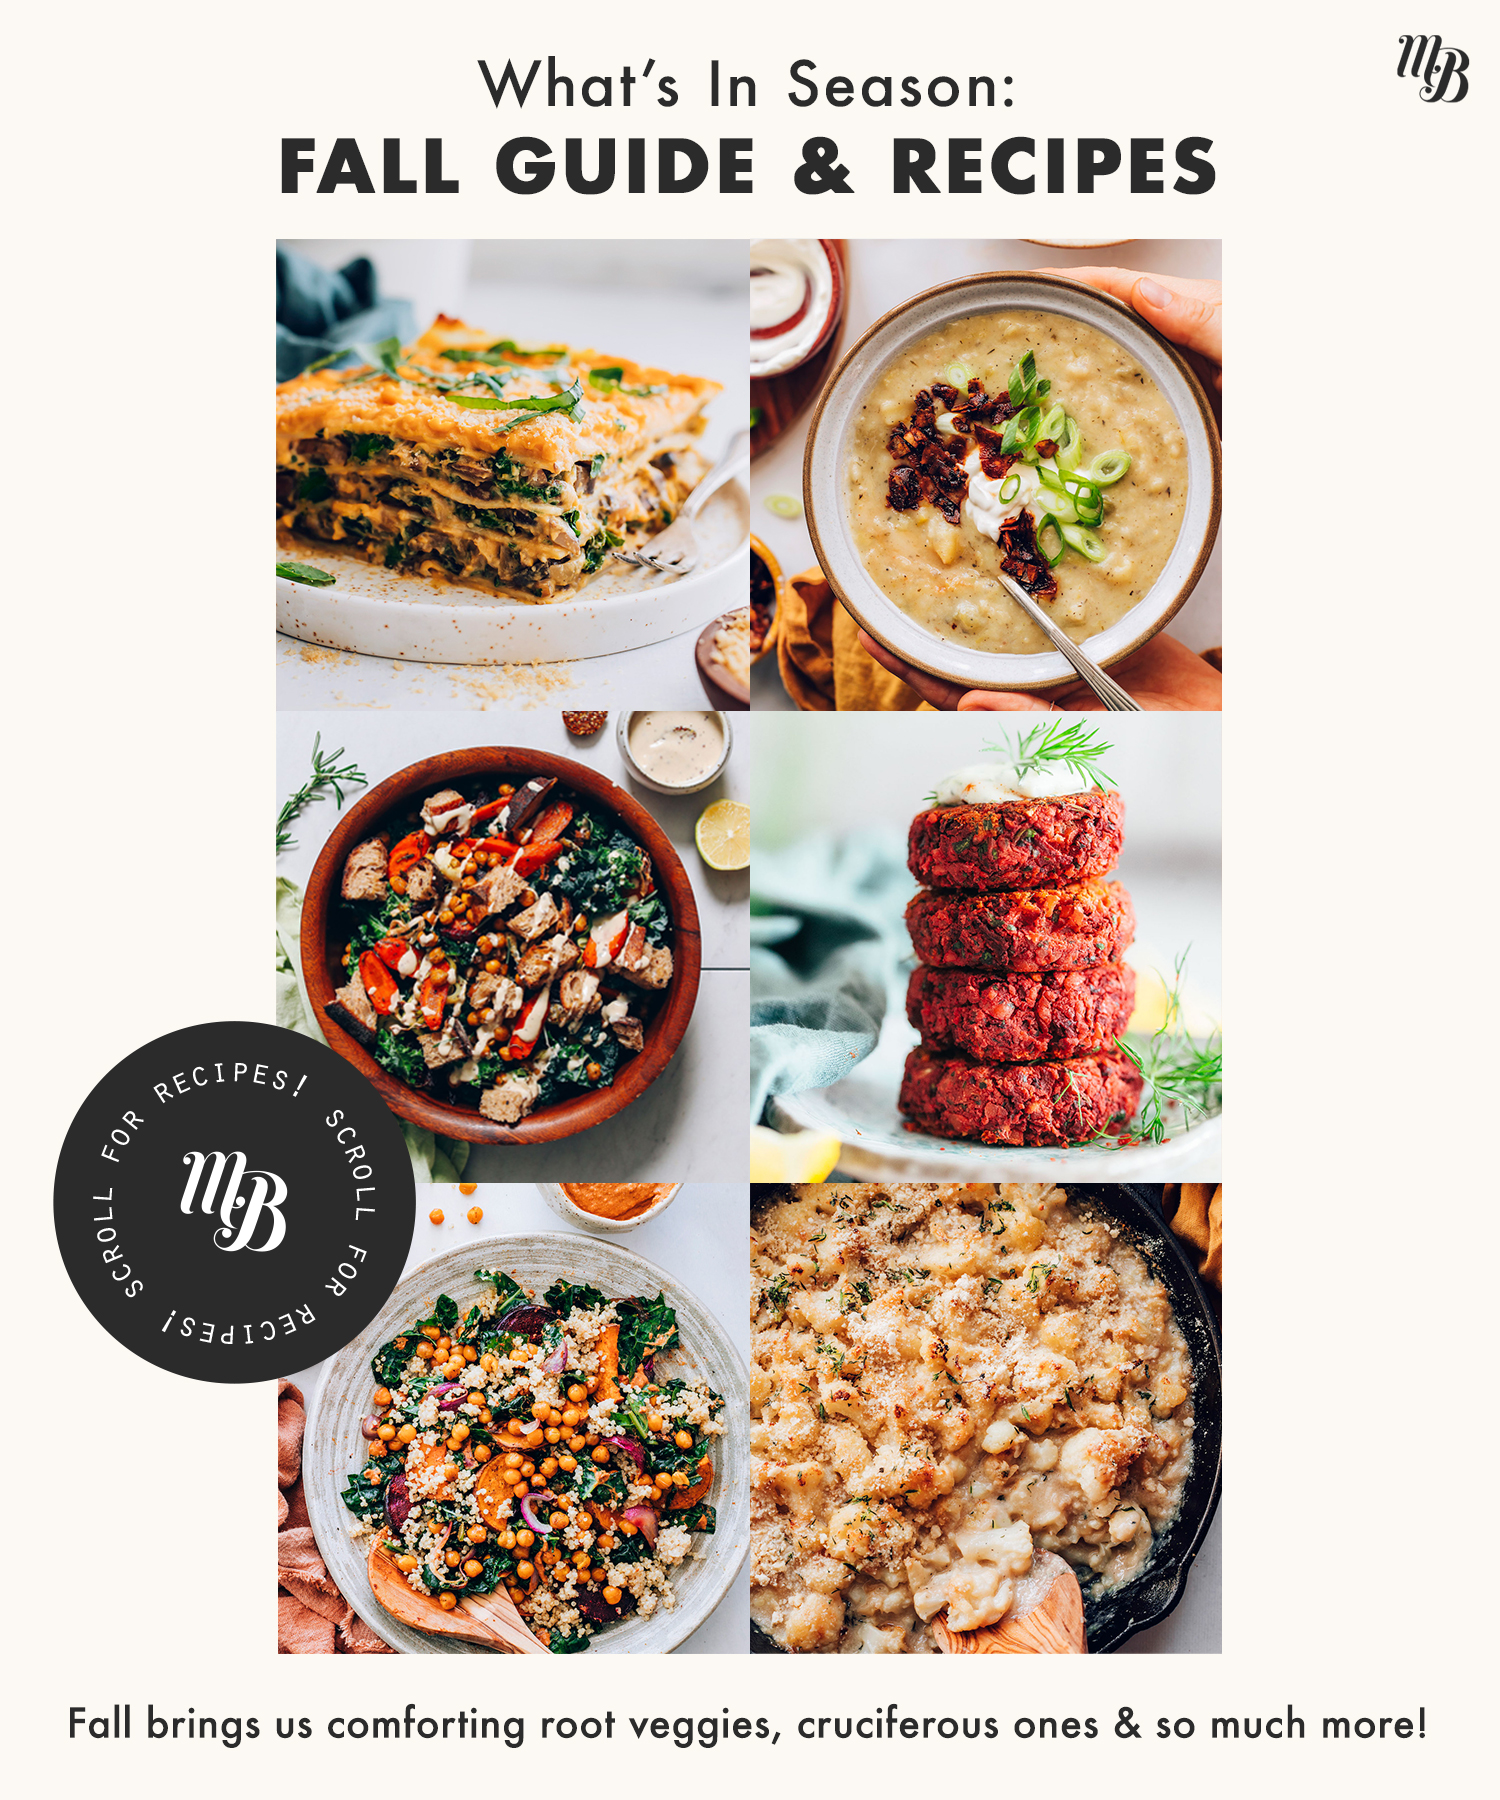 Assortment of fall recipes to showcase what produce is in season in fall